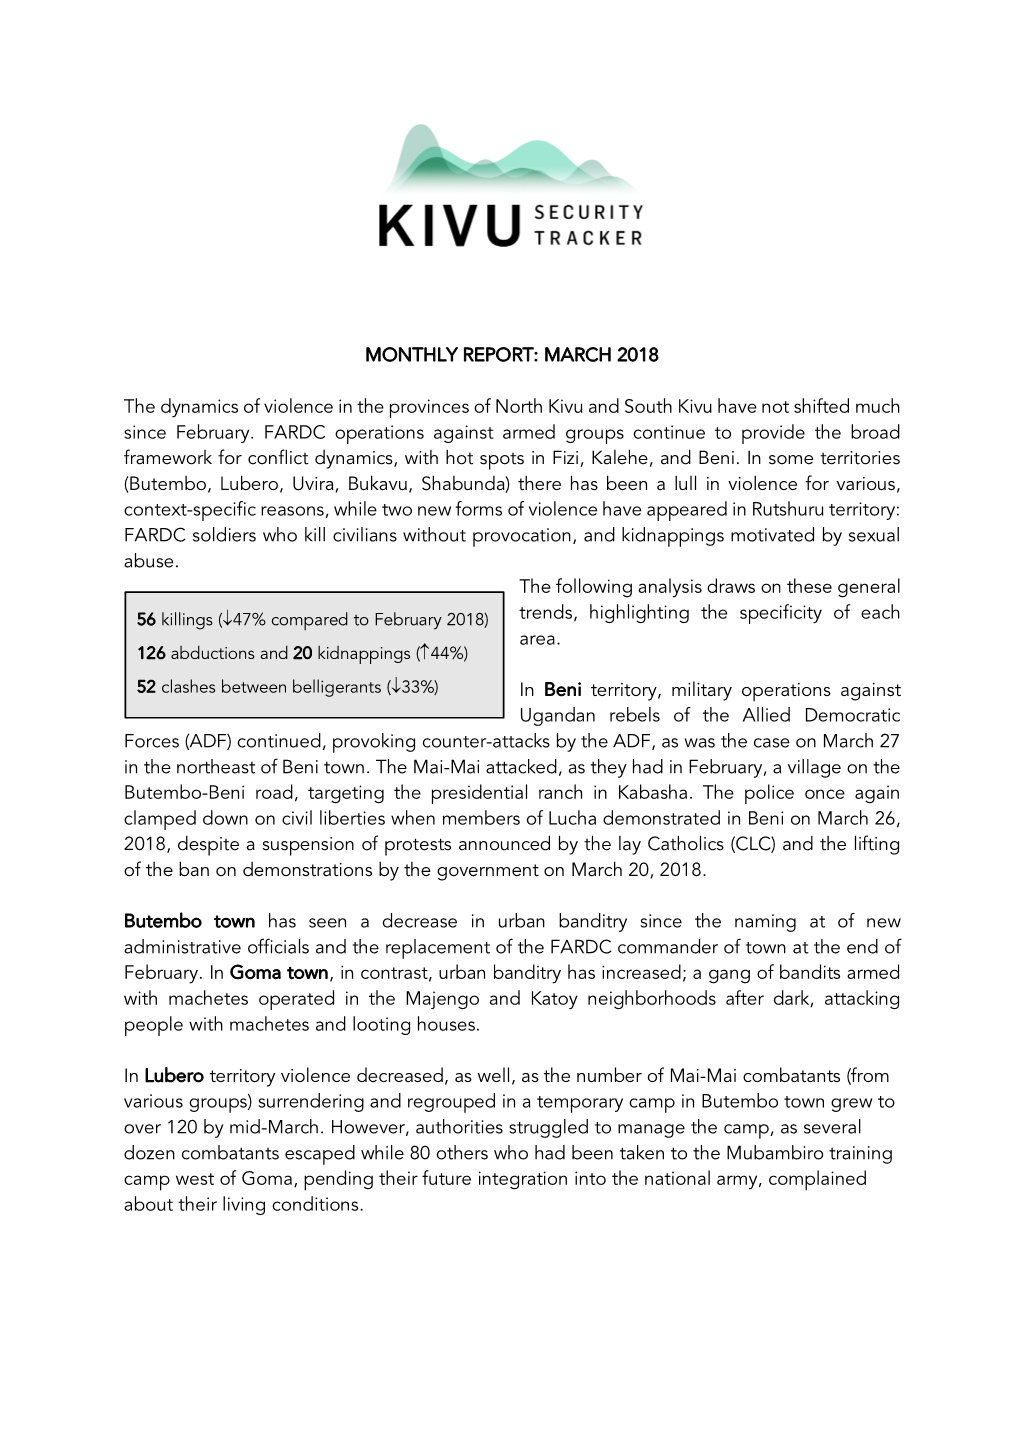 MONTHLY REPORT: MARCH 2018 the Dynamics of Violence in the Provinces of North Kivu and South Kivu Have Not Shifted Much Since Fe